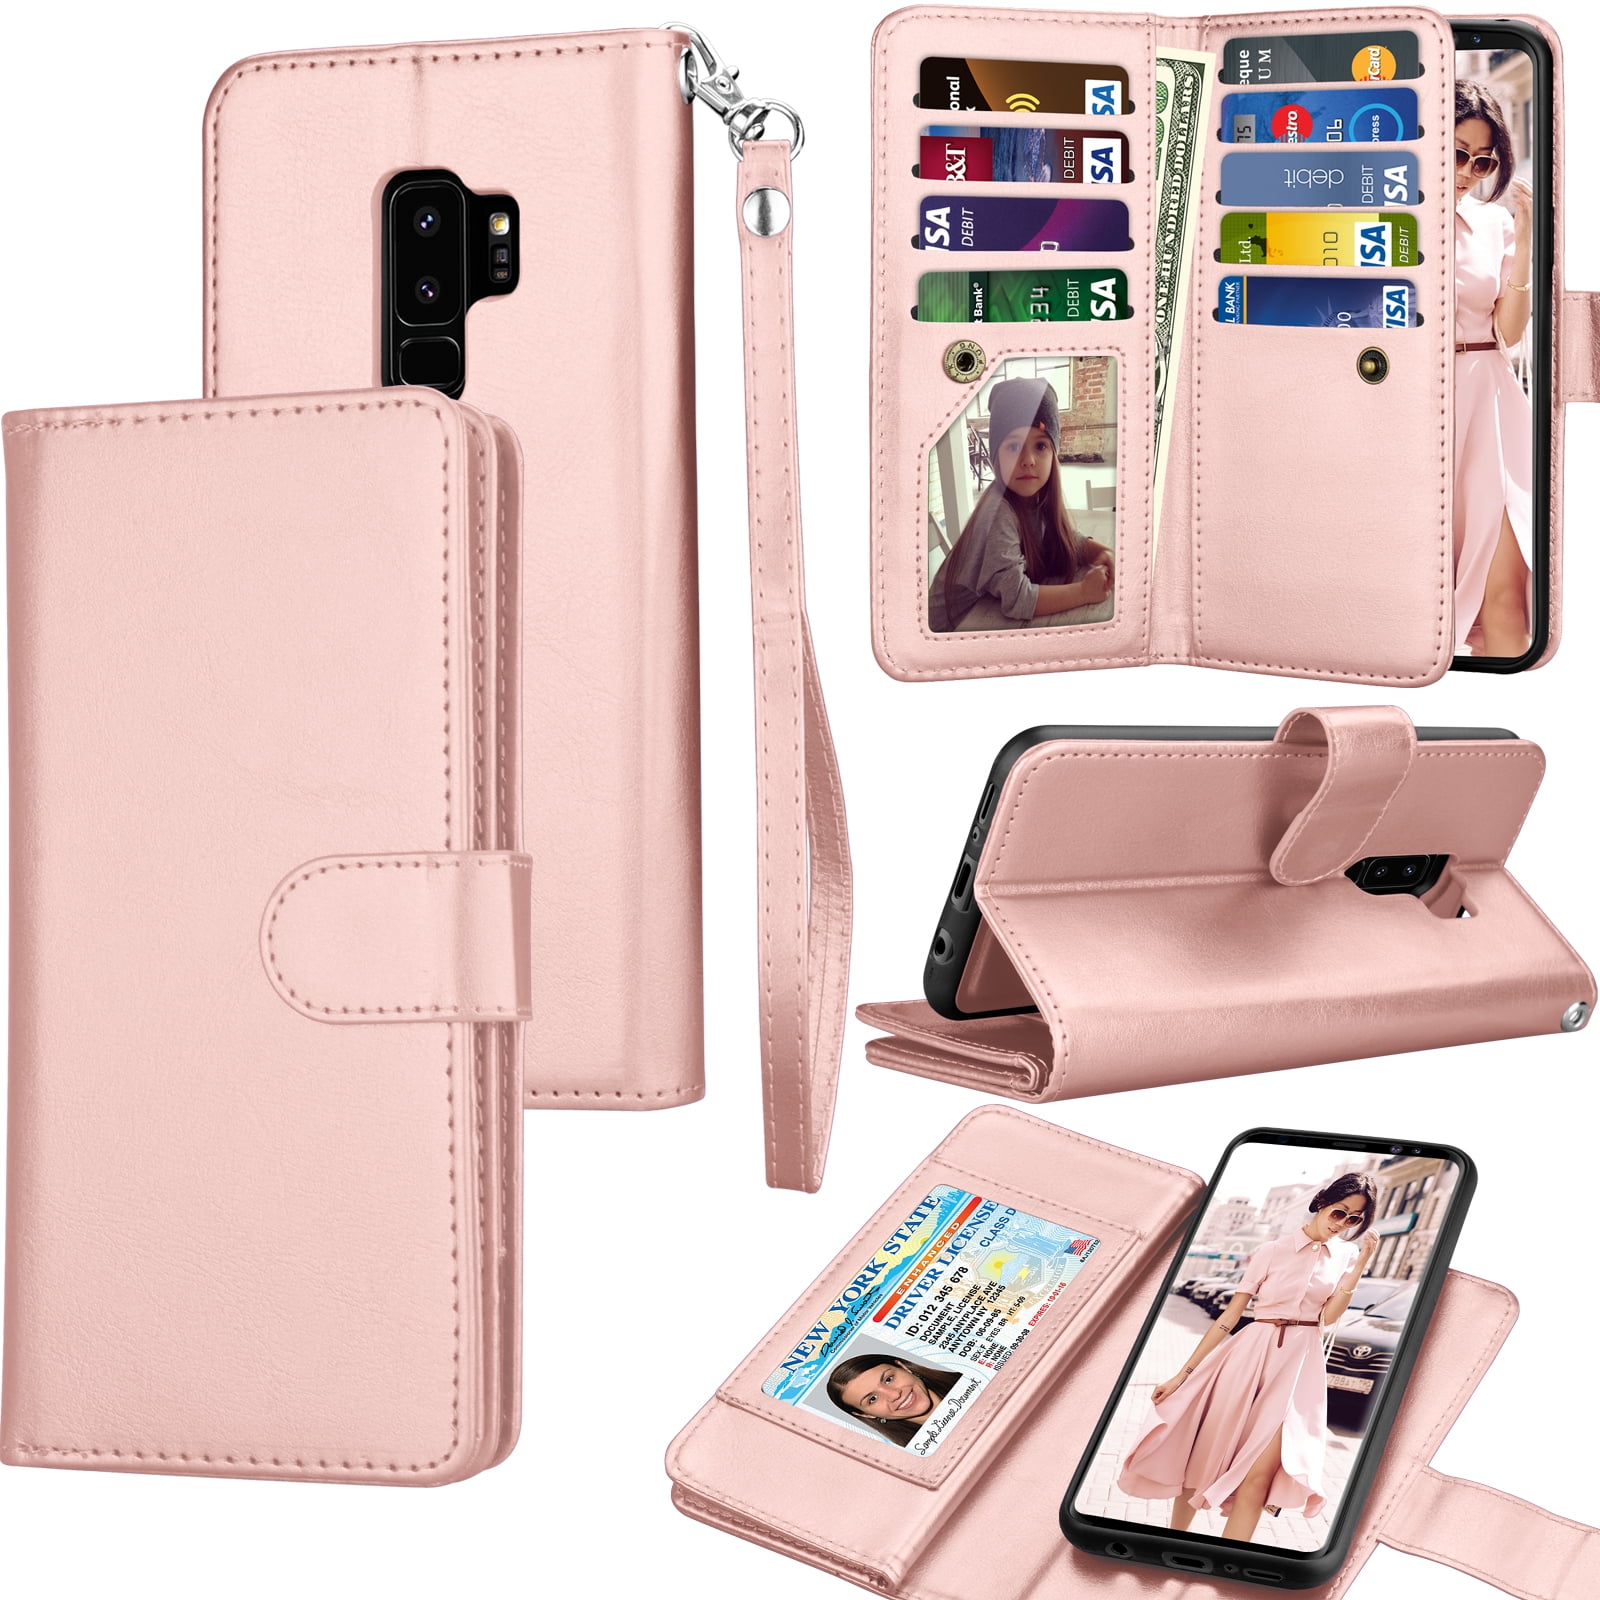 Extra-Shockproof smile Wallet Case for Samsung Galaxy S9 plus Leather Cover Compatible with Samsung Galaxy S9 plus 